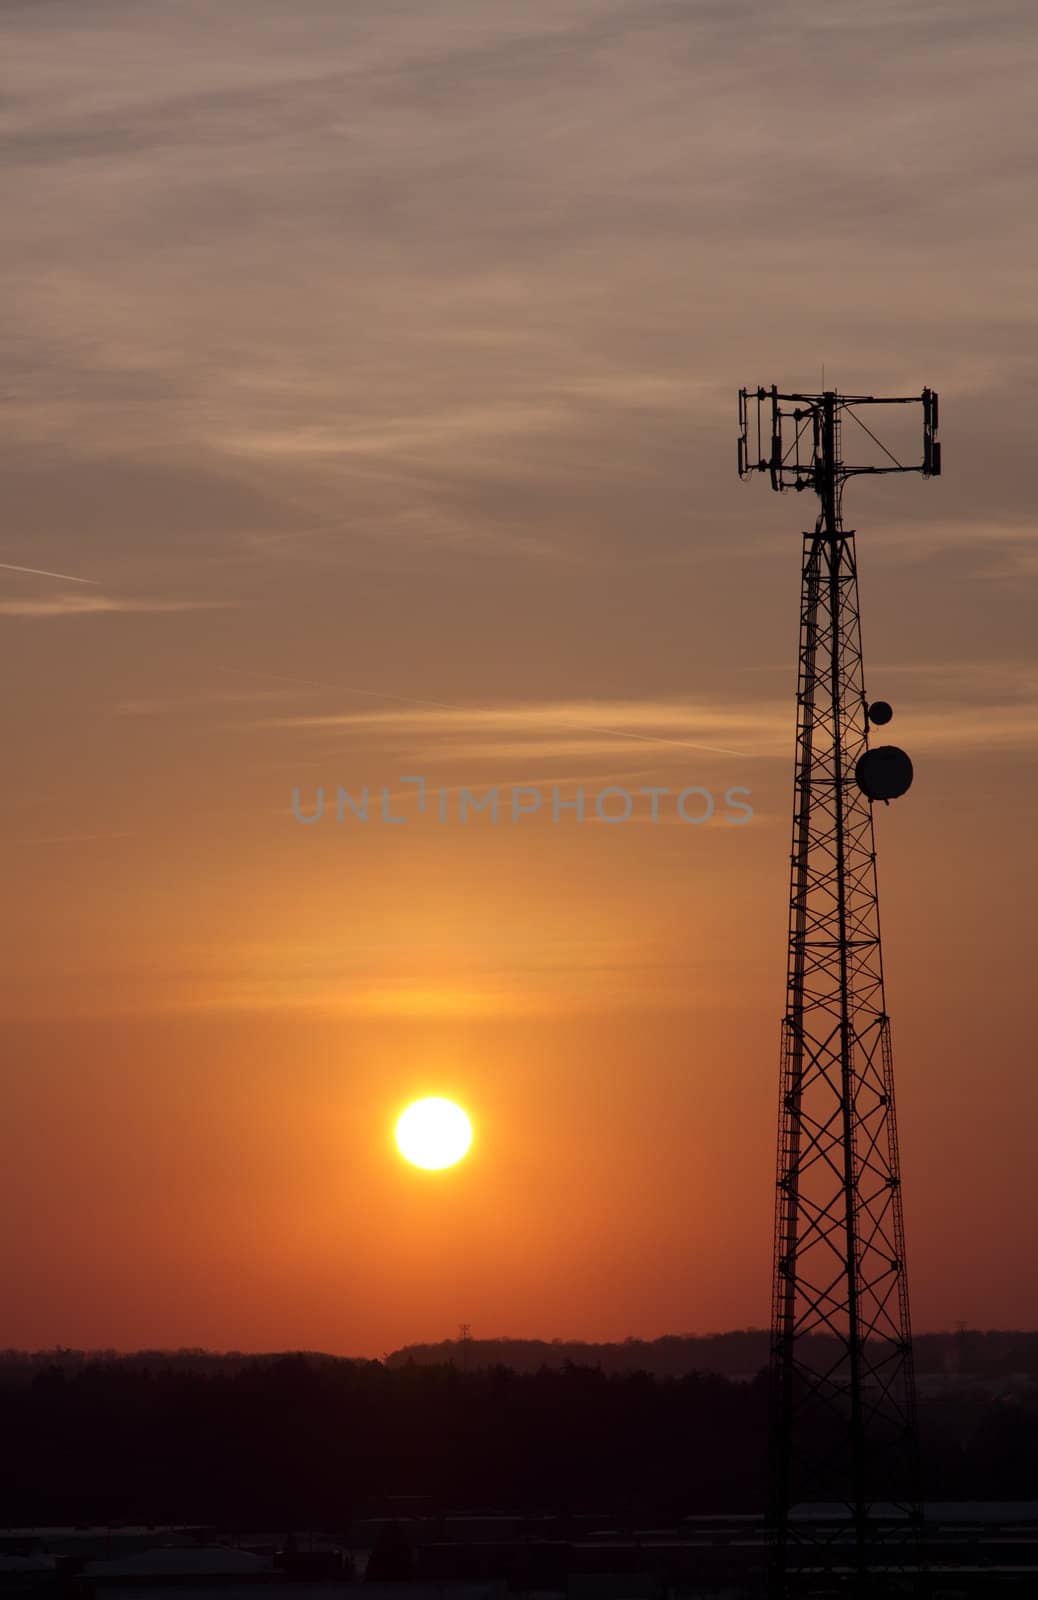 The silhouette of a cell phone tower shot against the orange cast of the setting sun.
